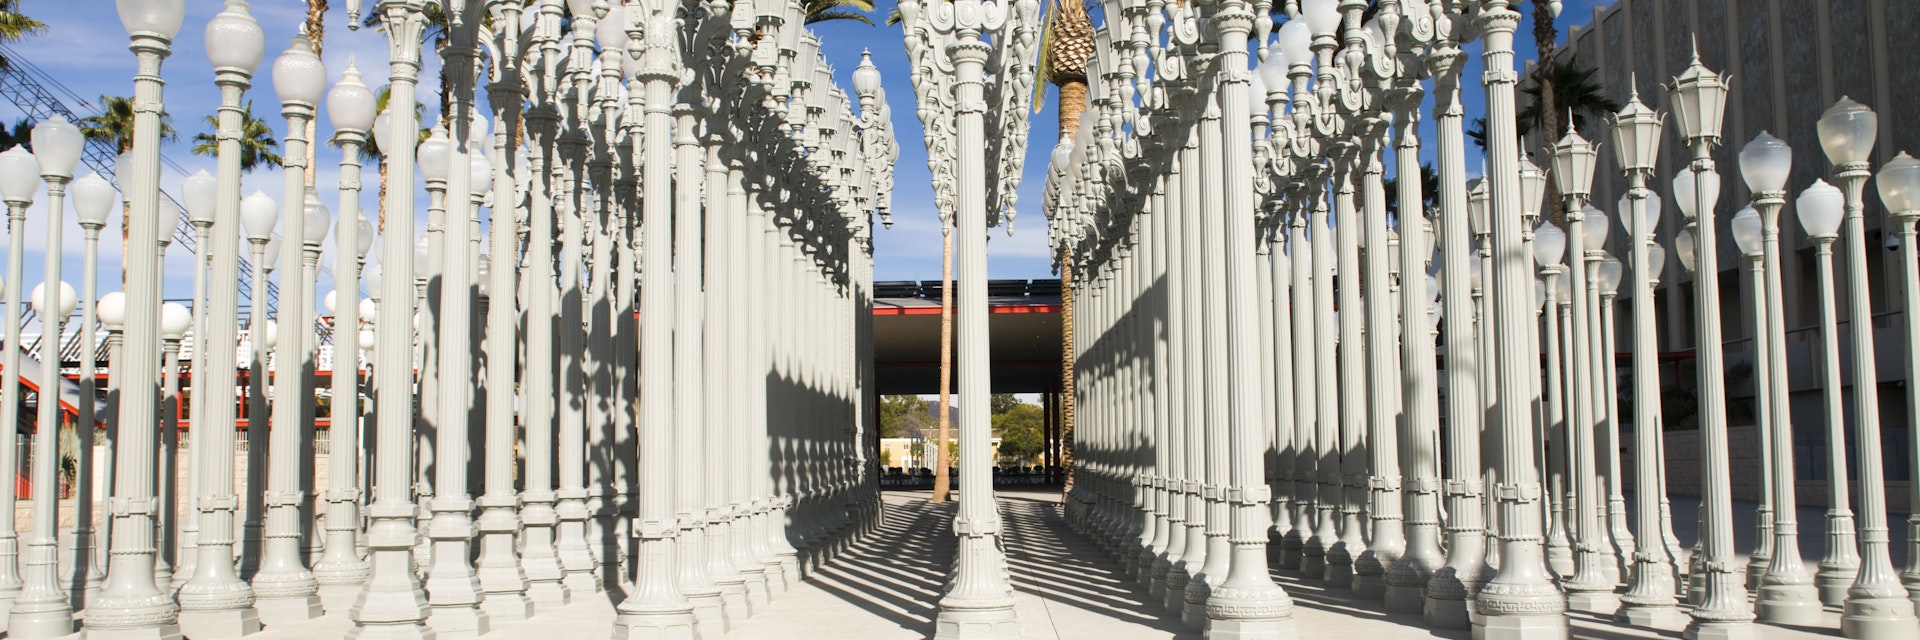 USA, California, Los Angeles, Miracle Mile District, Los Angeles County Museum of Art, LACMA, BP entrance with Urban Light by Chris Burden